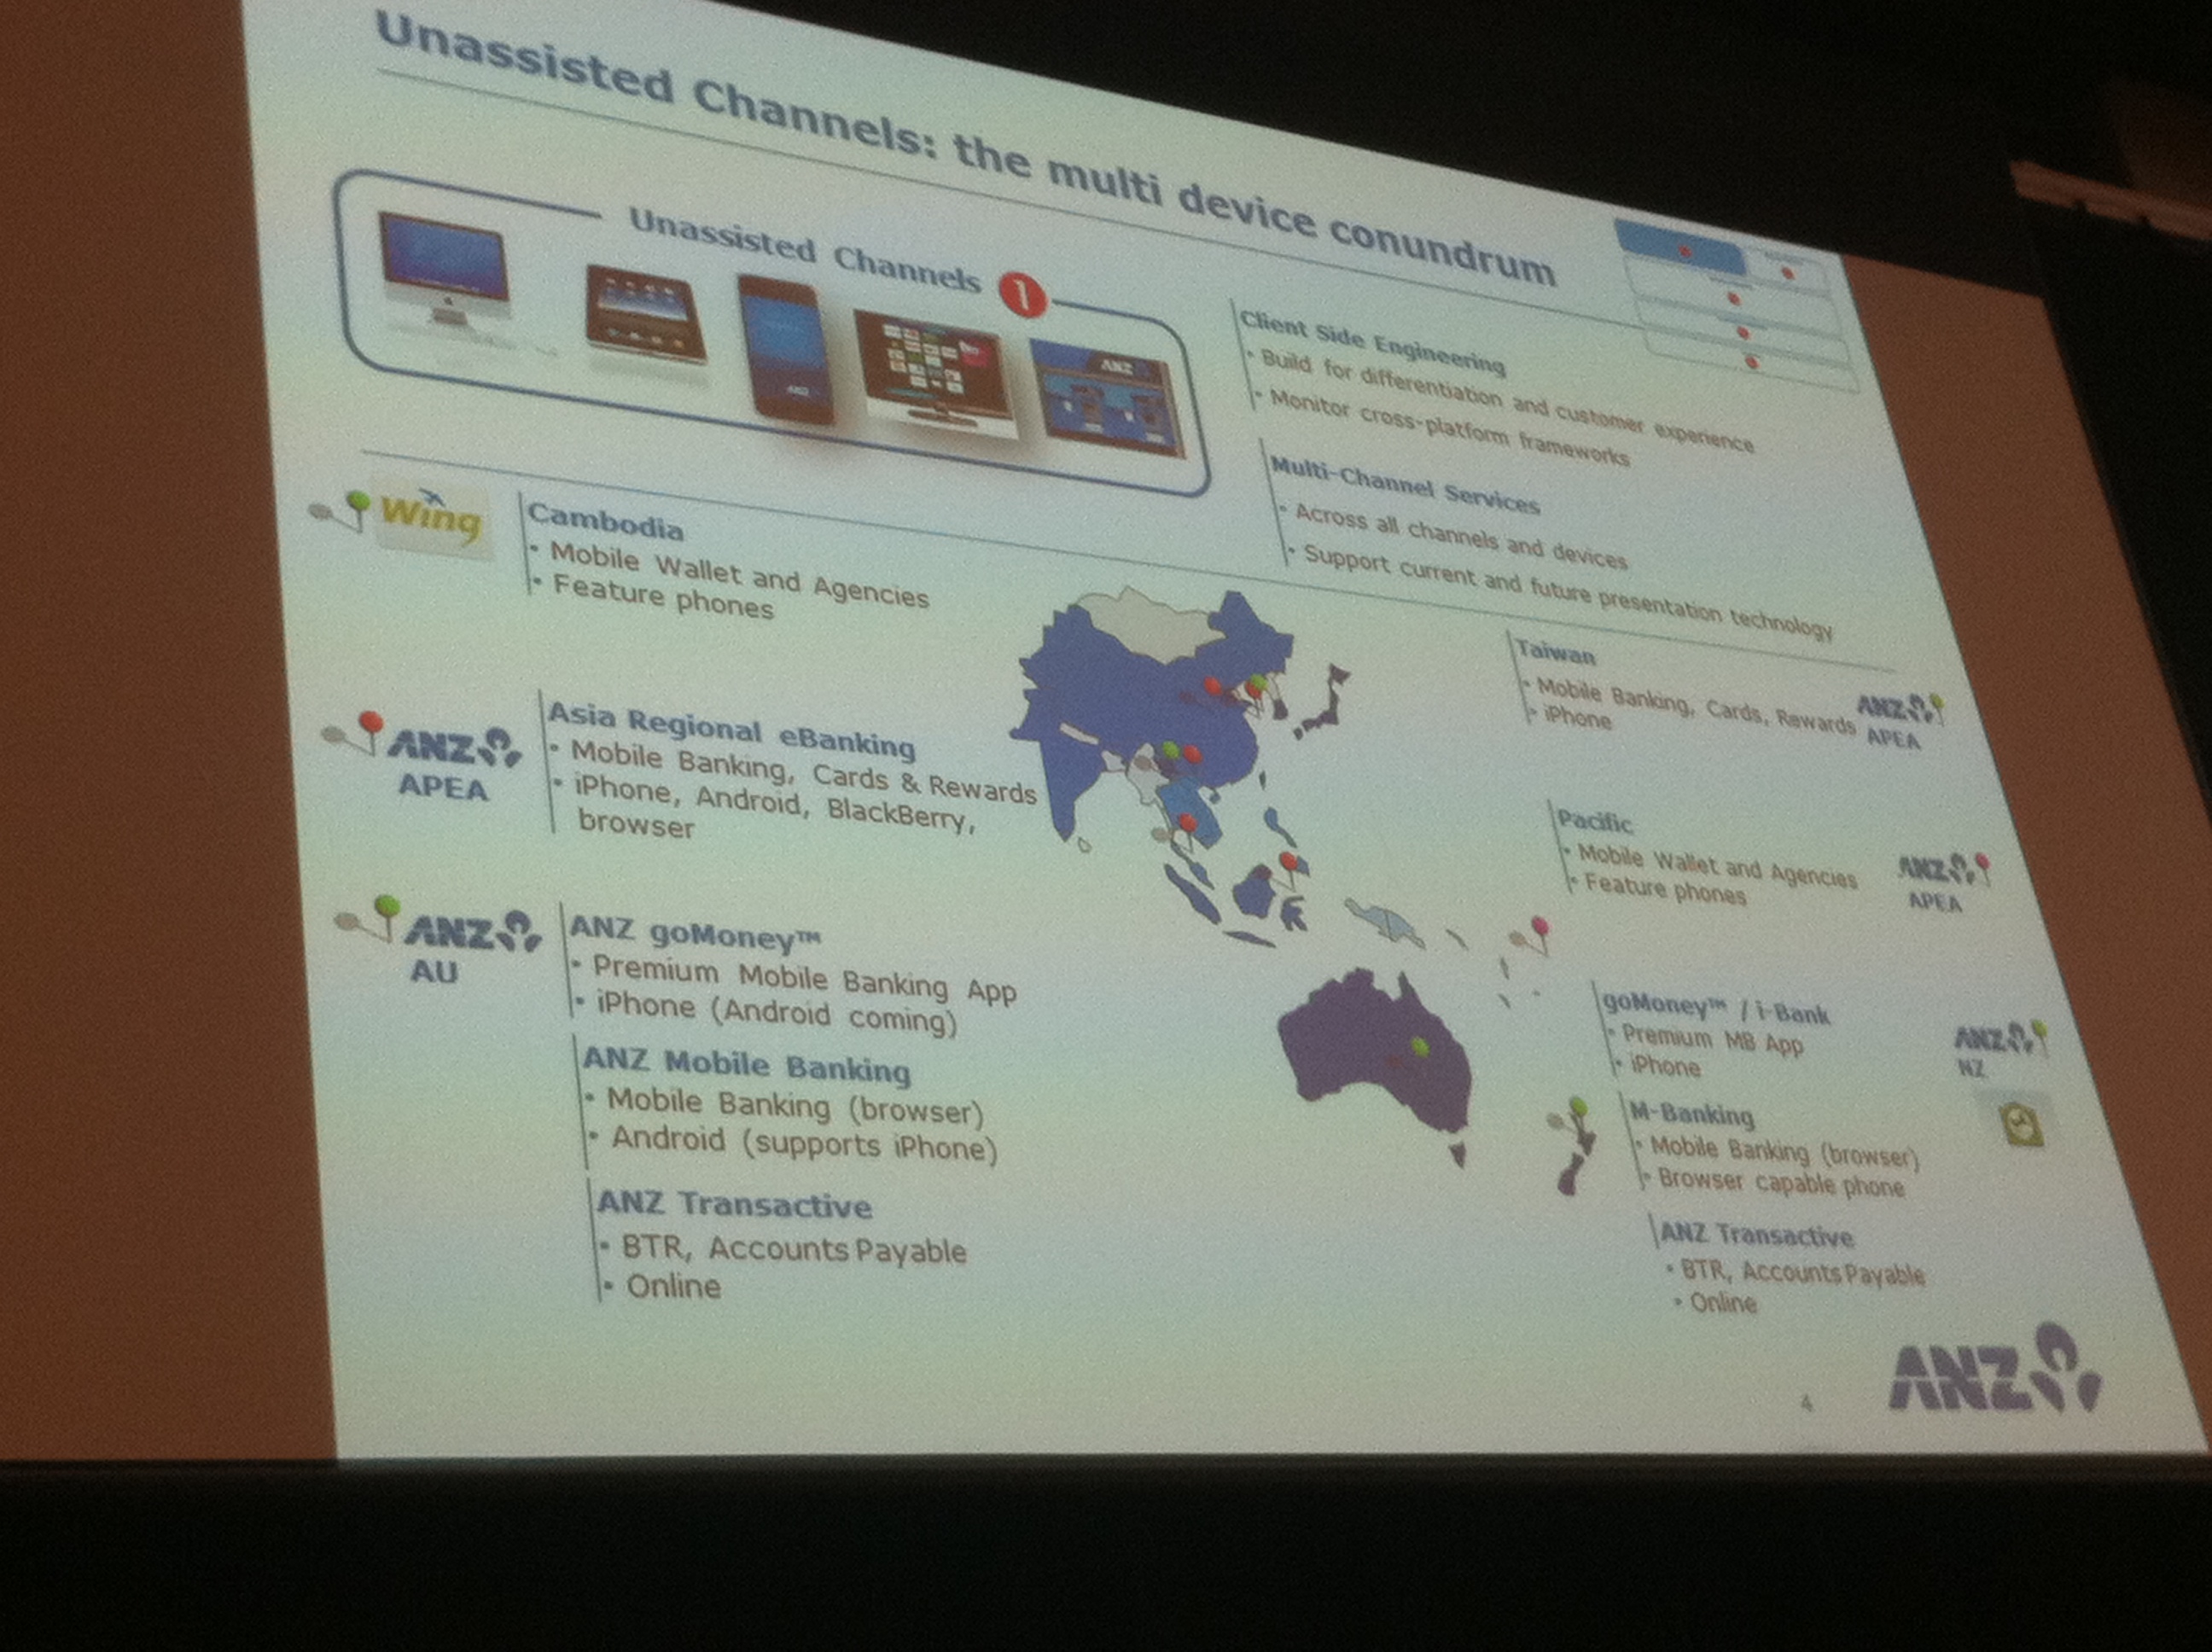 ANZ Unassisted channels